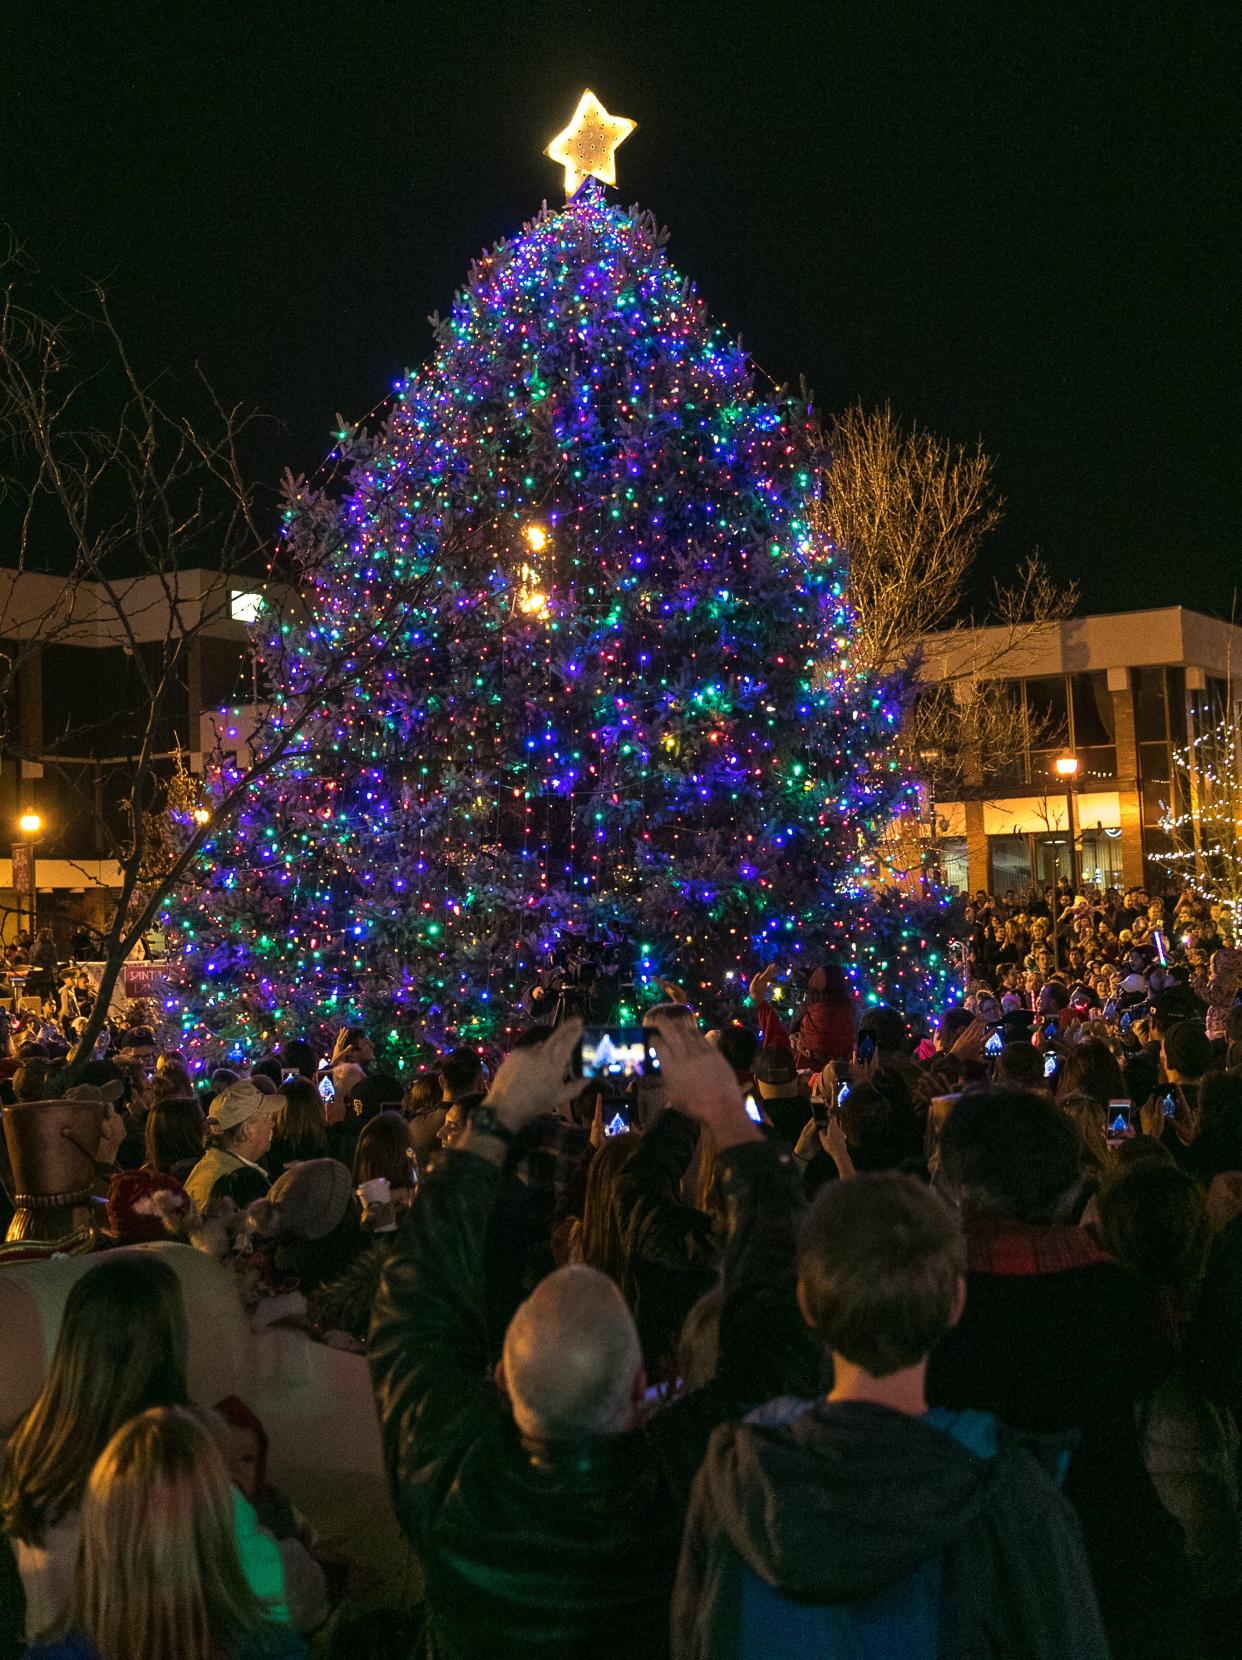 This weekend marks the official start of the city’s holiday season, with Saturday’s Mayor’s Tree Lighting Celebration lighting the way.